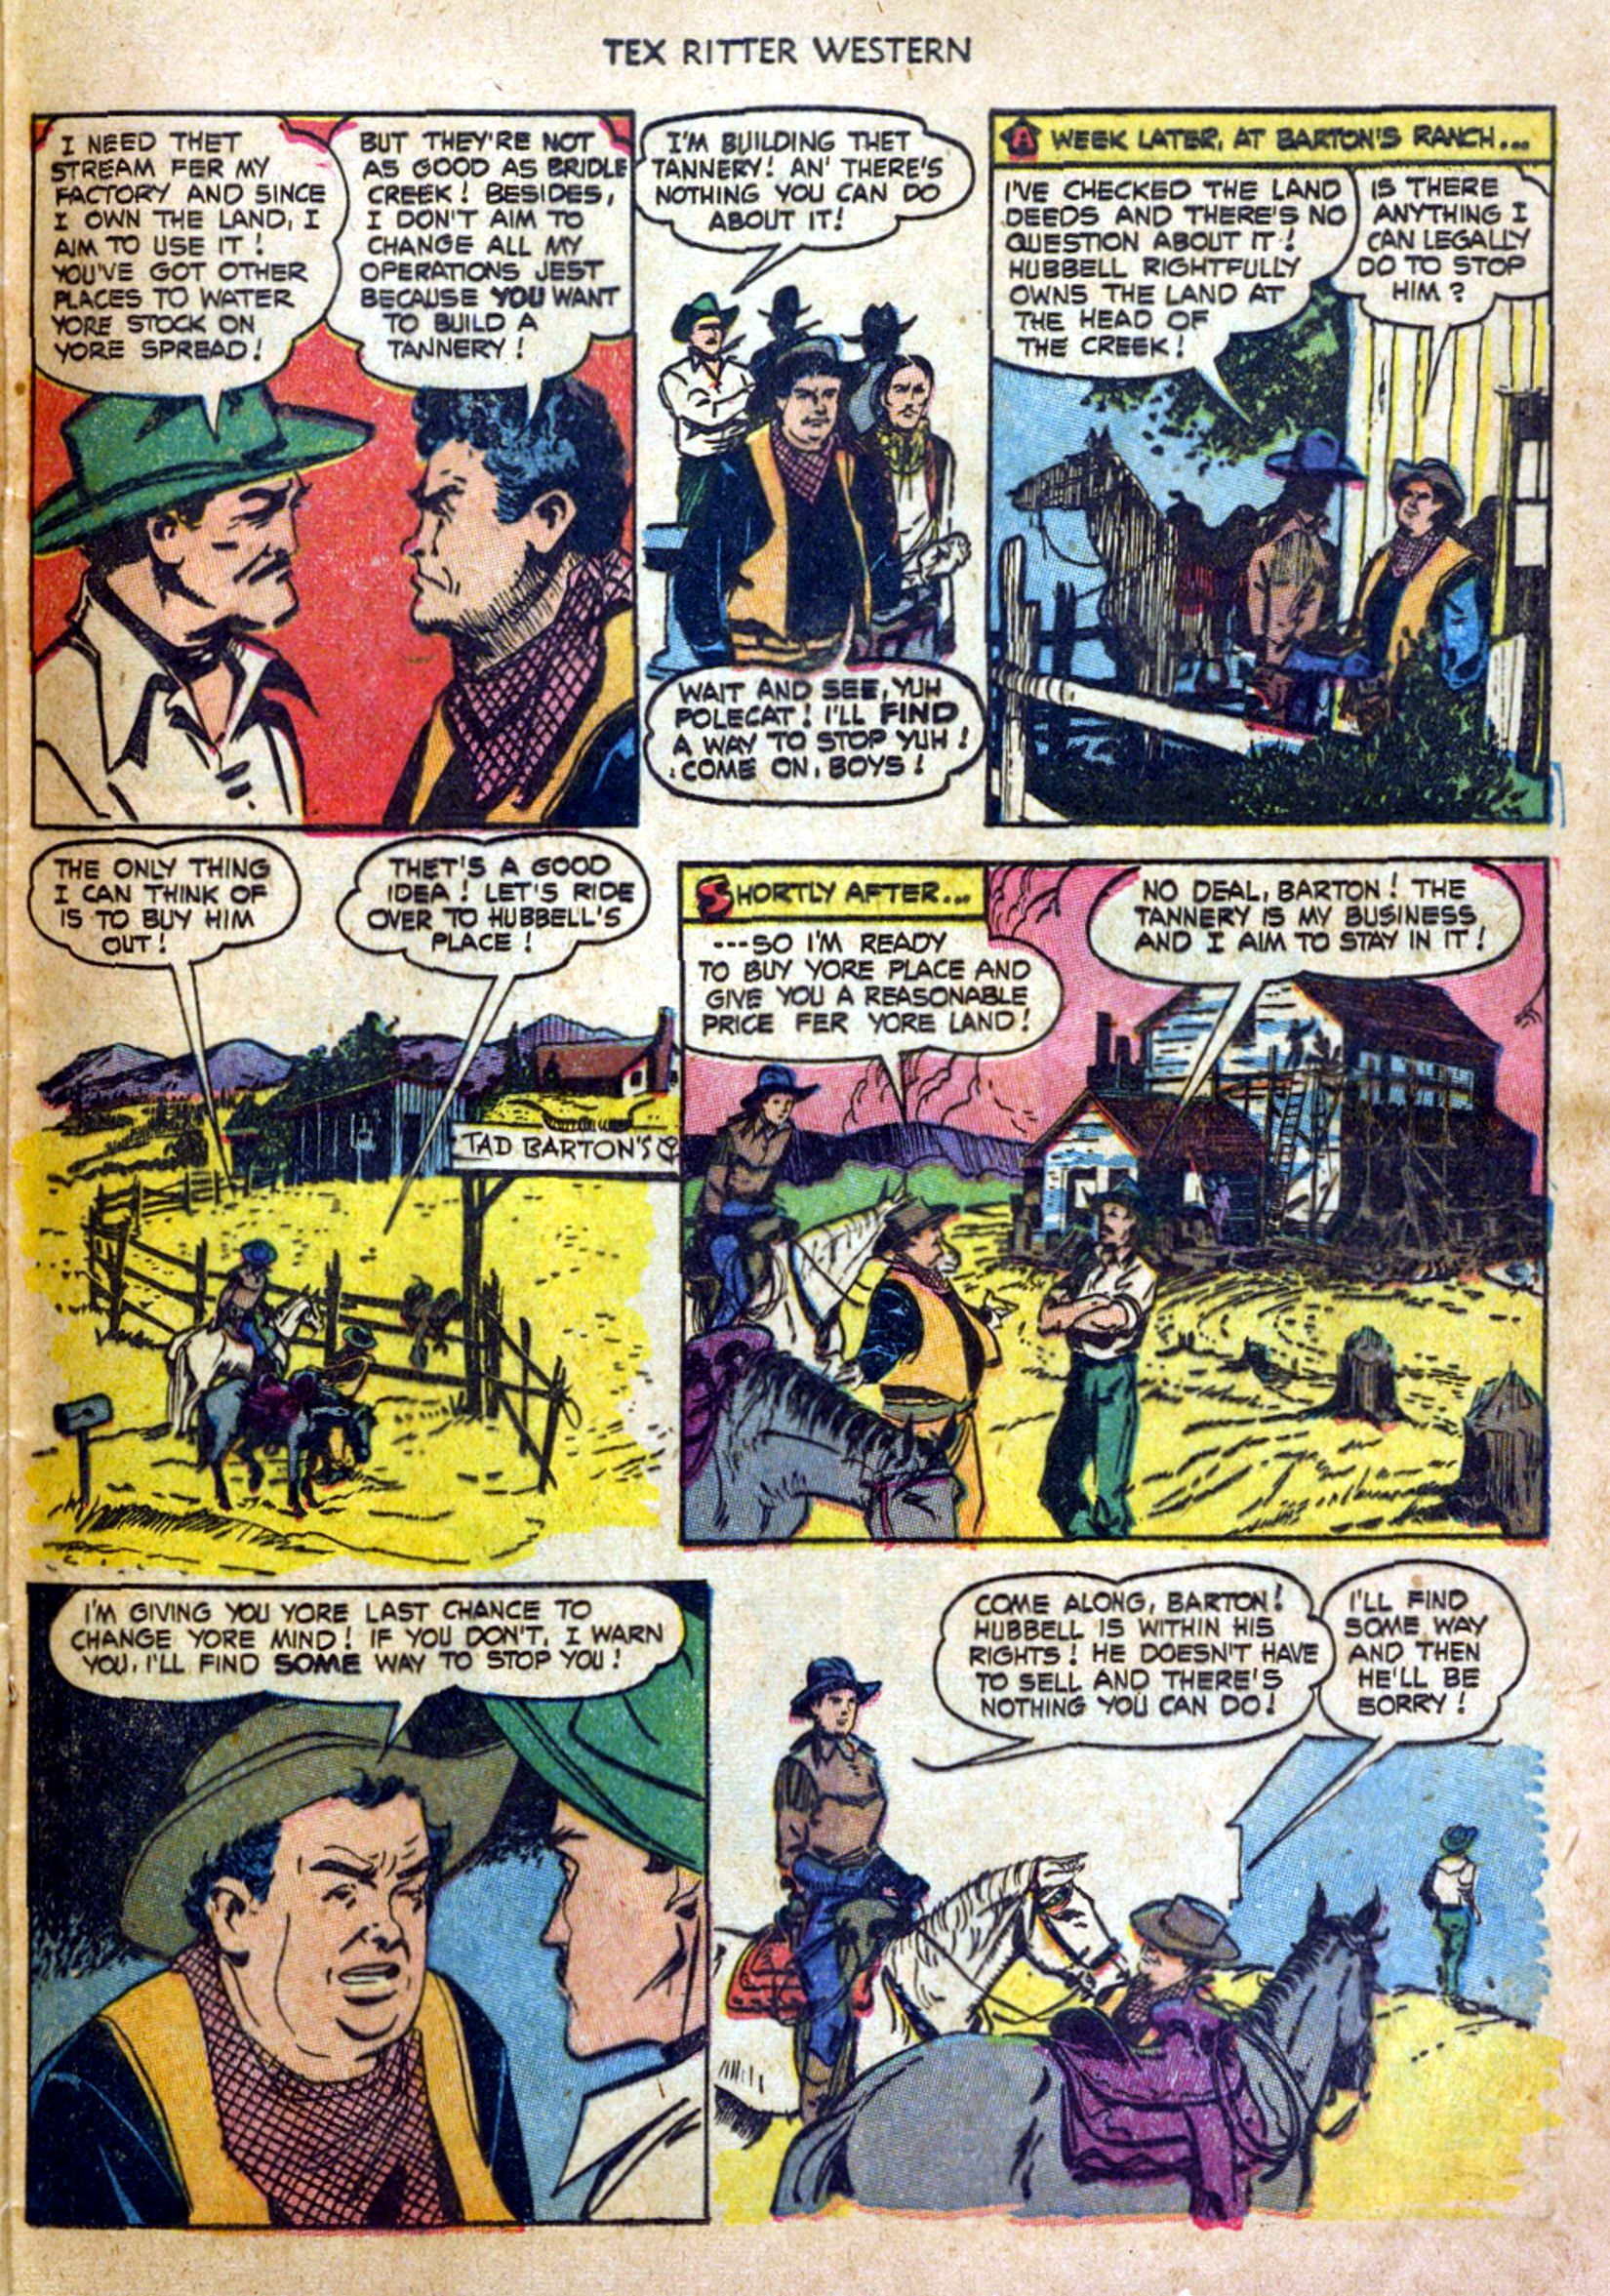 Read online Tex Ritter Western comic -  Issue #20 - 25